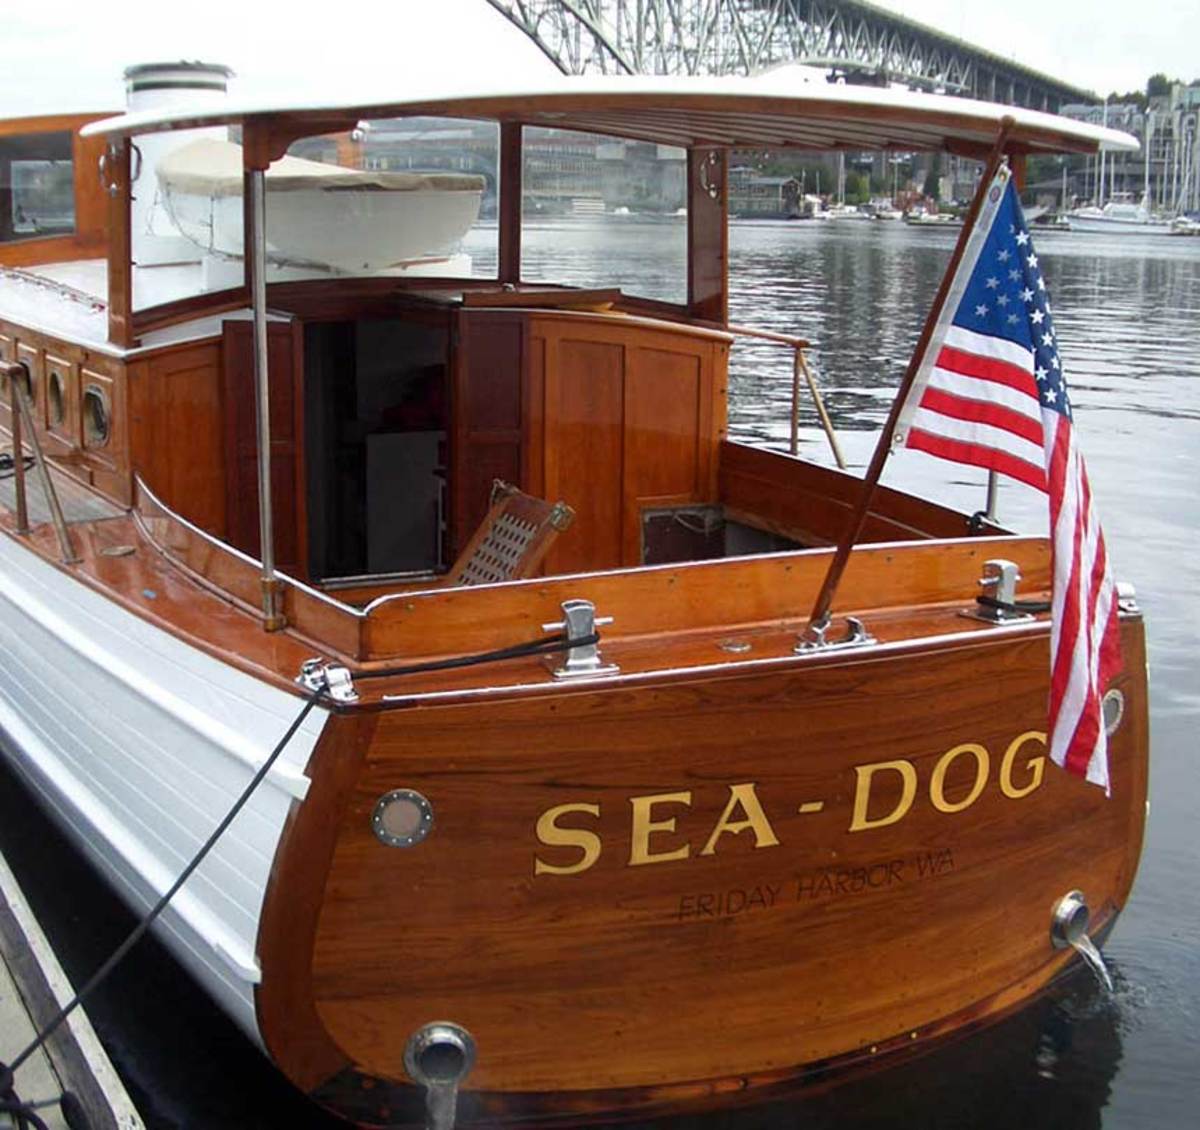 Sea-Dog was used as a platform to showcase products.